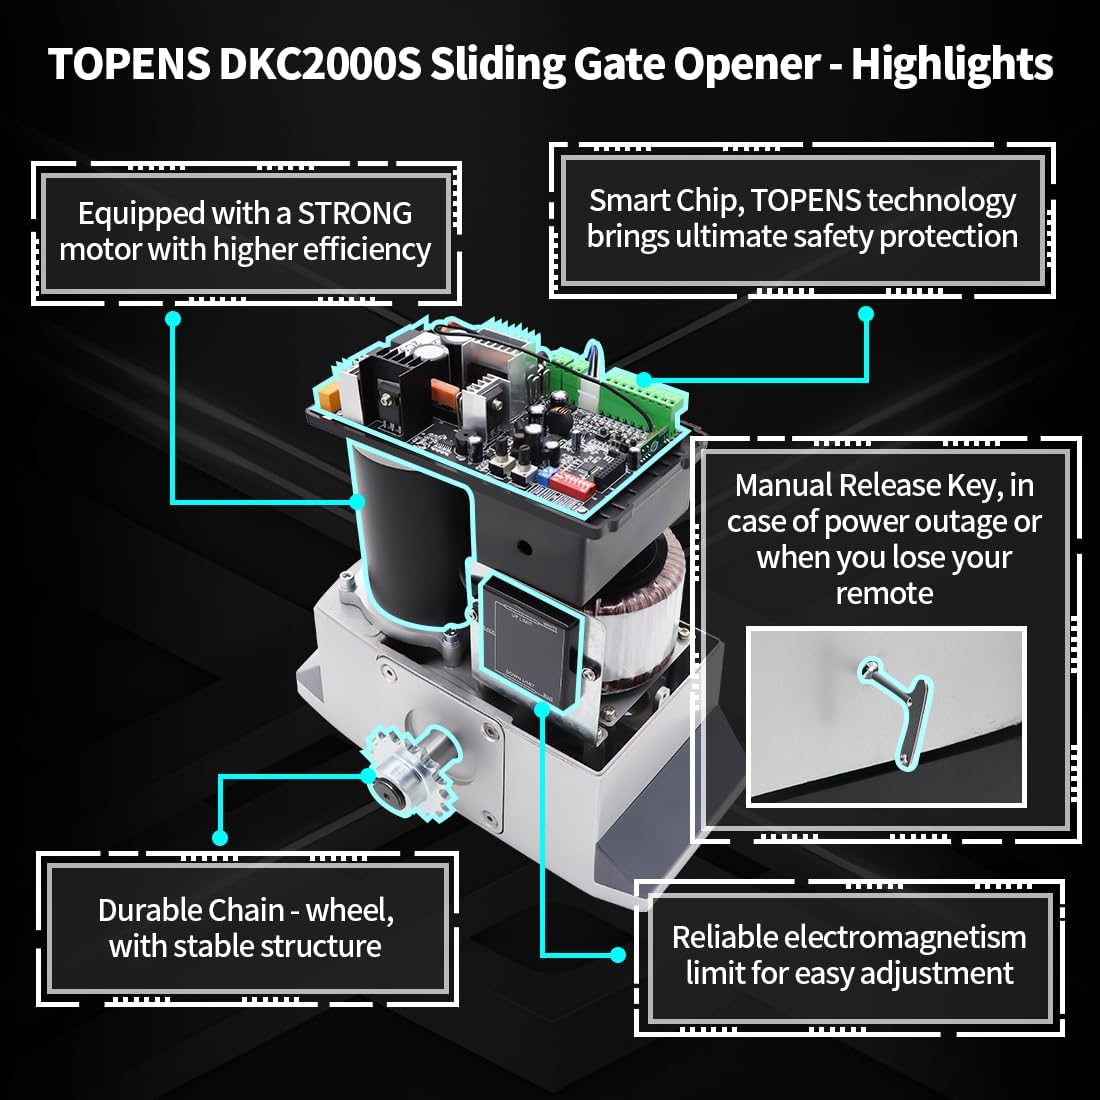 TOPENS DKC2000S Solar Sliding Gate Opener Chain Drive Automatic Gate Motor for Heavy Driveway Slide Gates Up to 440